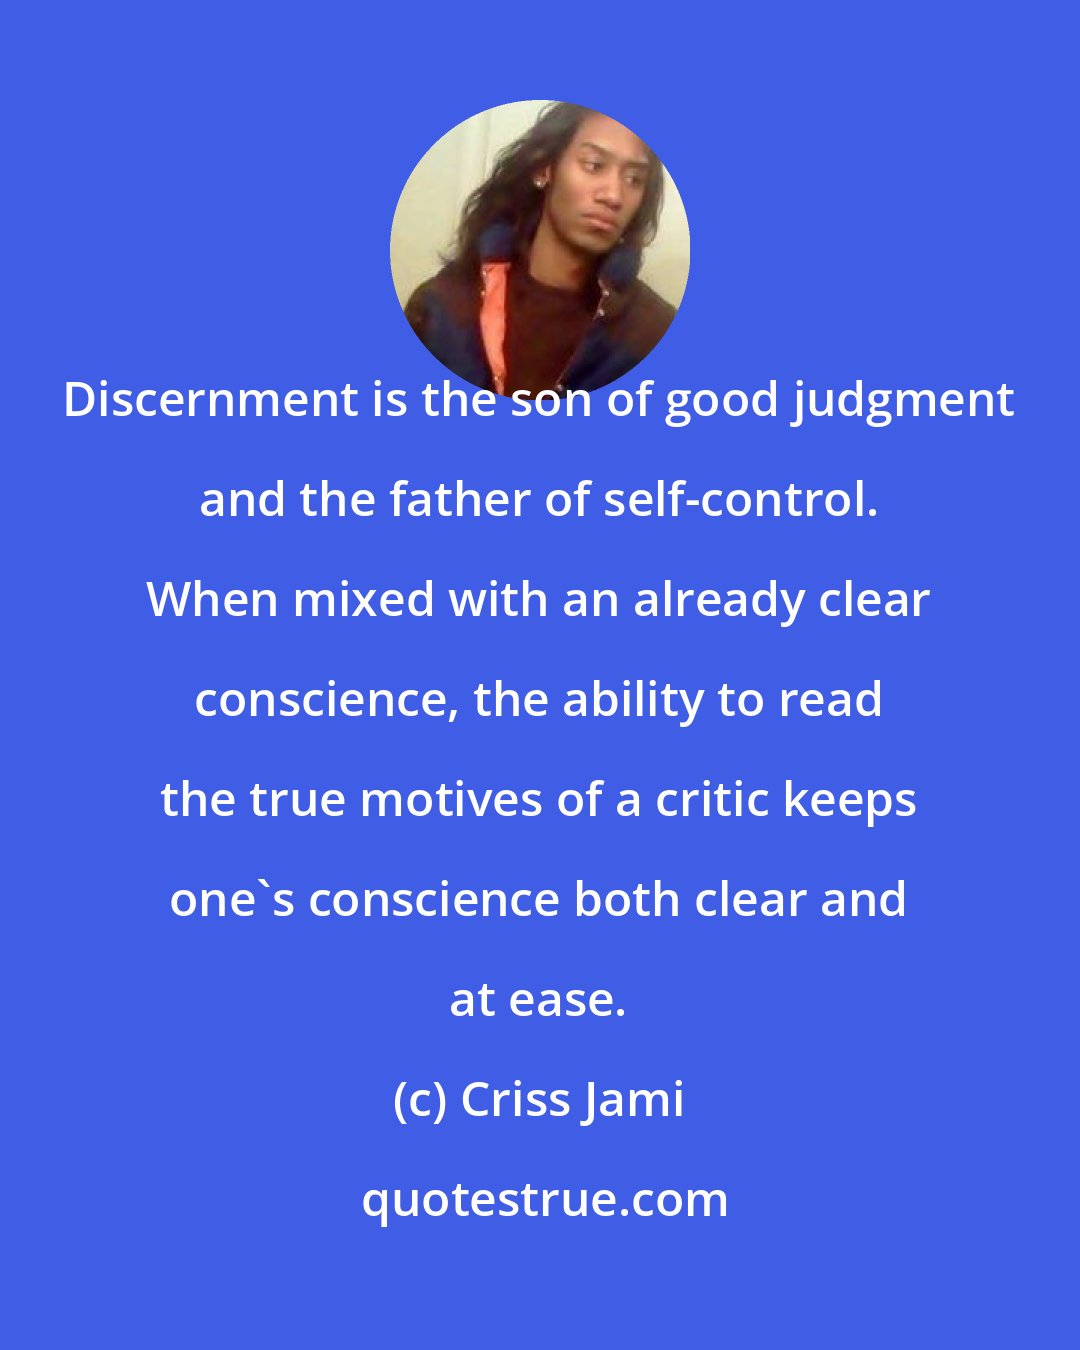 Criss Jami: Discernment is the son of good judgment and the father of self-control. When mixed with an already clear conscience, the ability to read the true motives of a critic keeps one's conscience both clear and at ease.